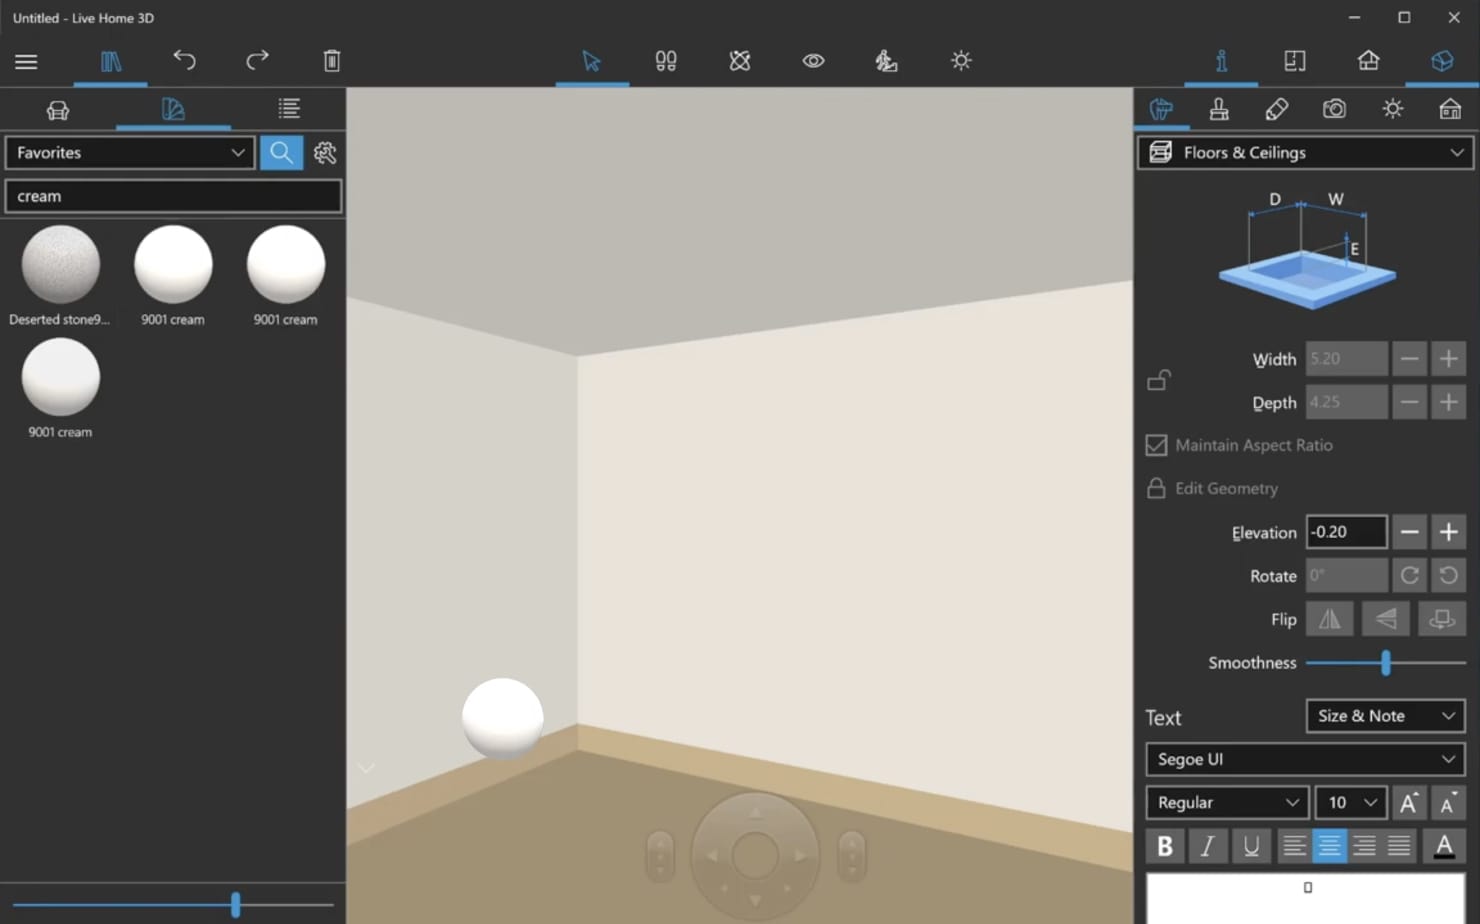 A screenshot showcasing how to work with elevation and moldings in Live Home 3D.